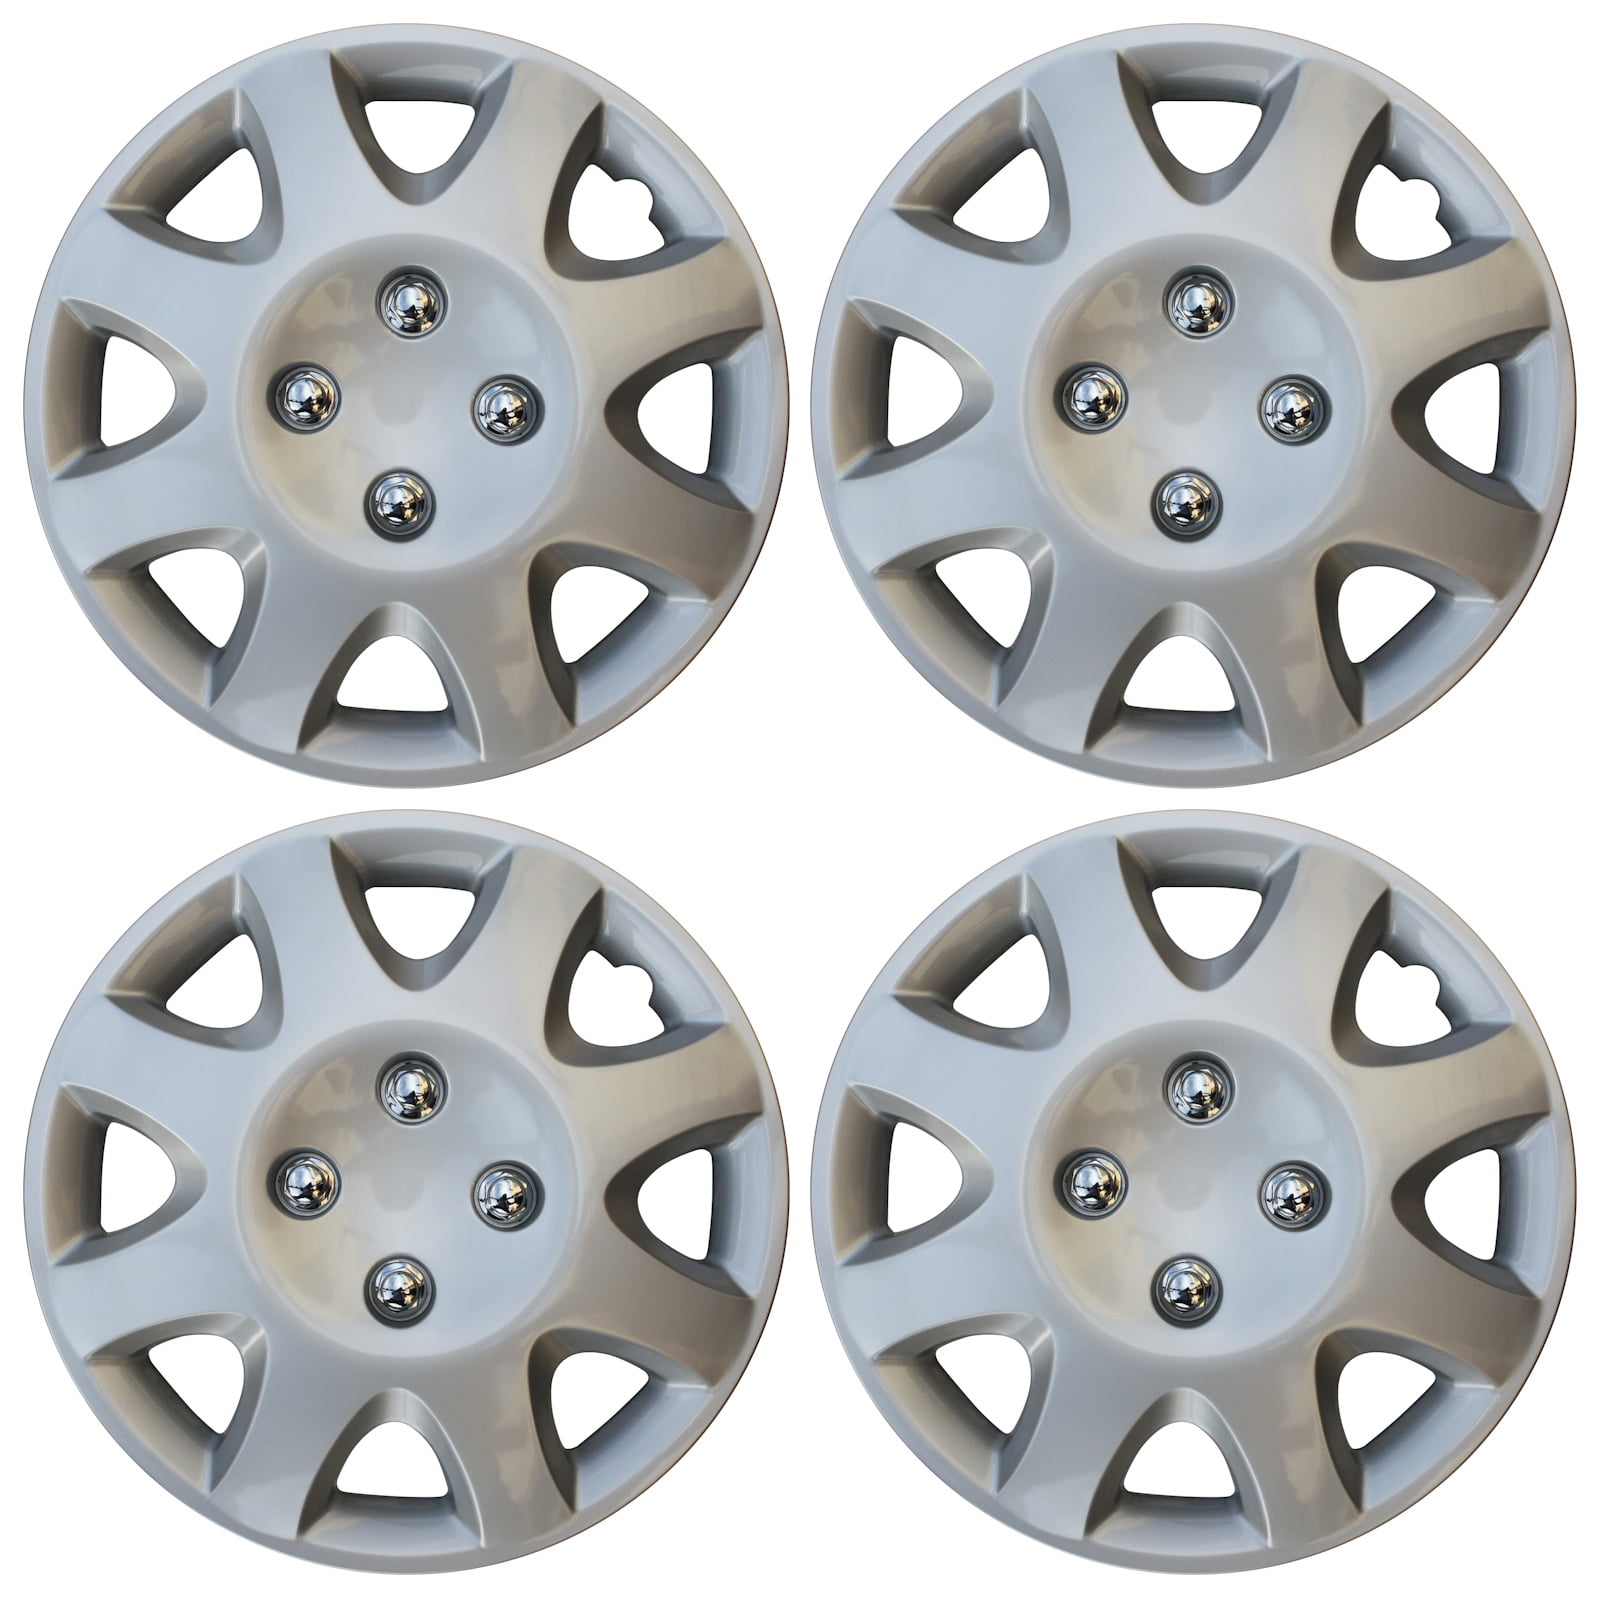 SET OF 4 14" SILVER WHEEL TRIMS COVER,RIMS,HUB,CAPS TO FIT RENAULT GIFT #12 